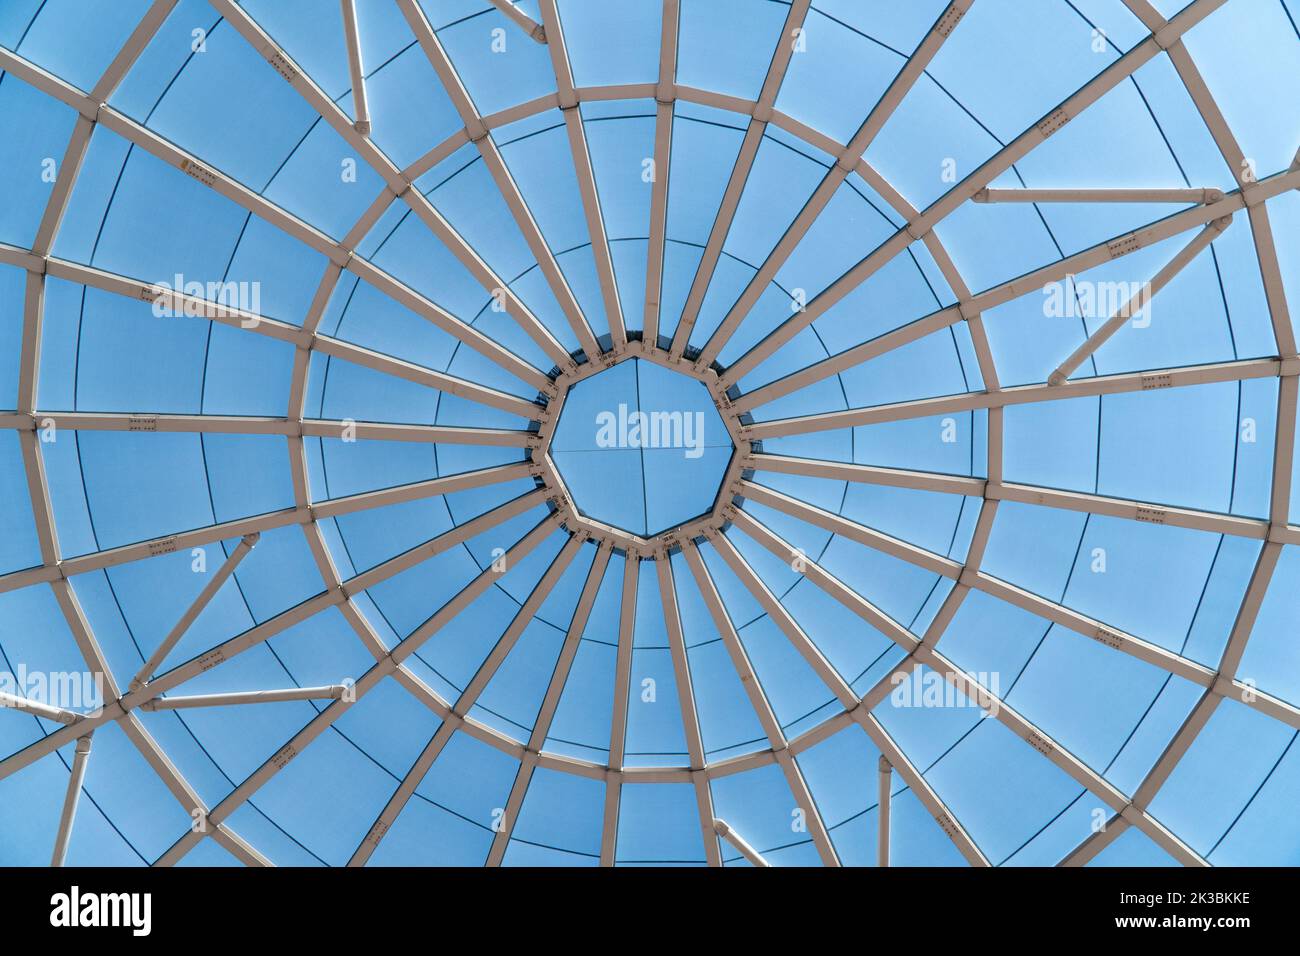 Top of the dome structure - a circle of circular steel beams Stock Photo